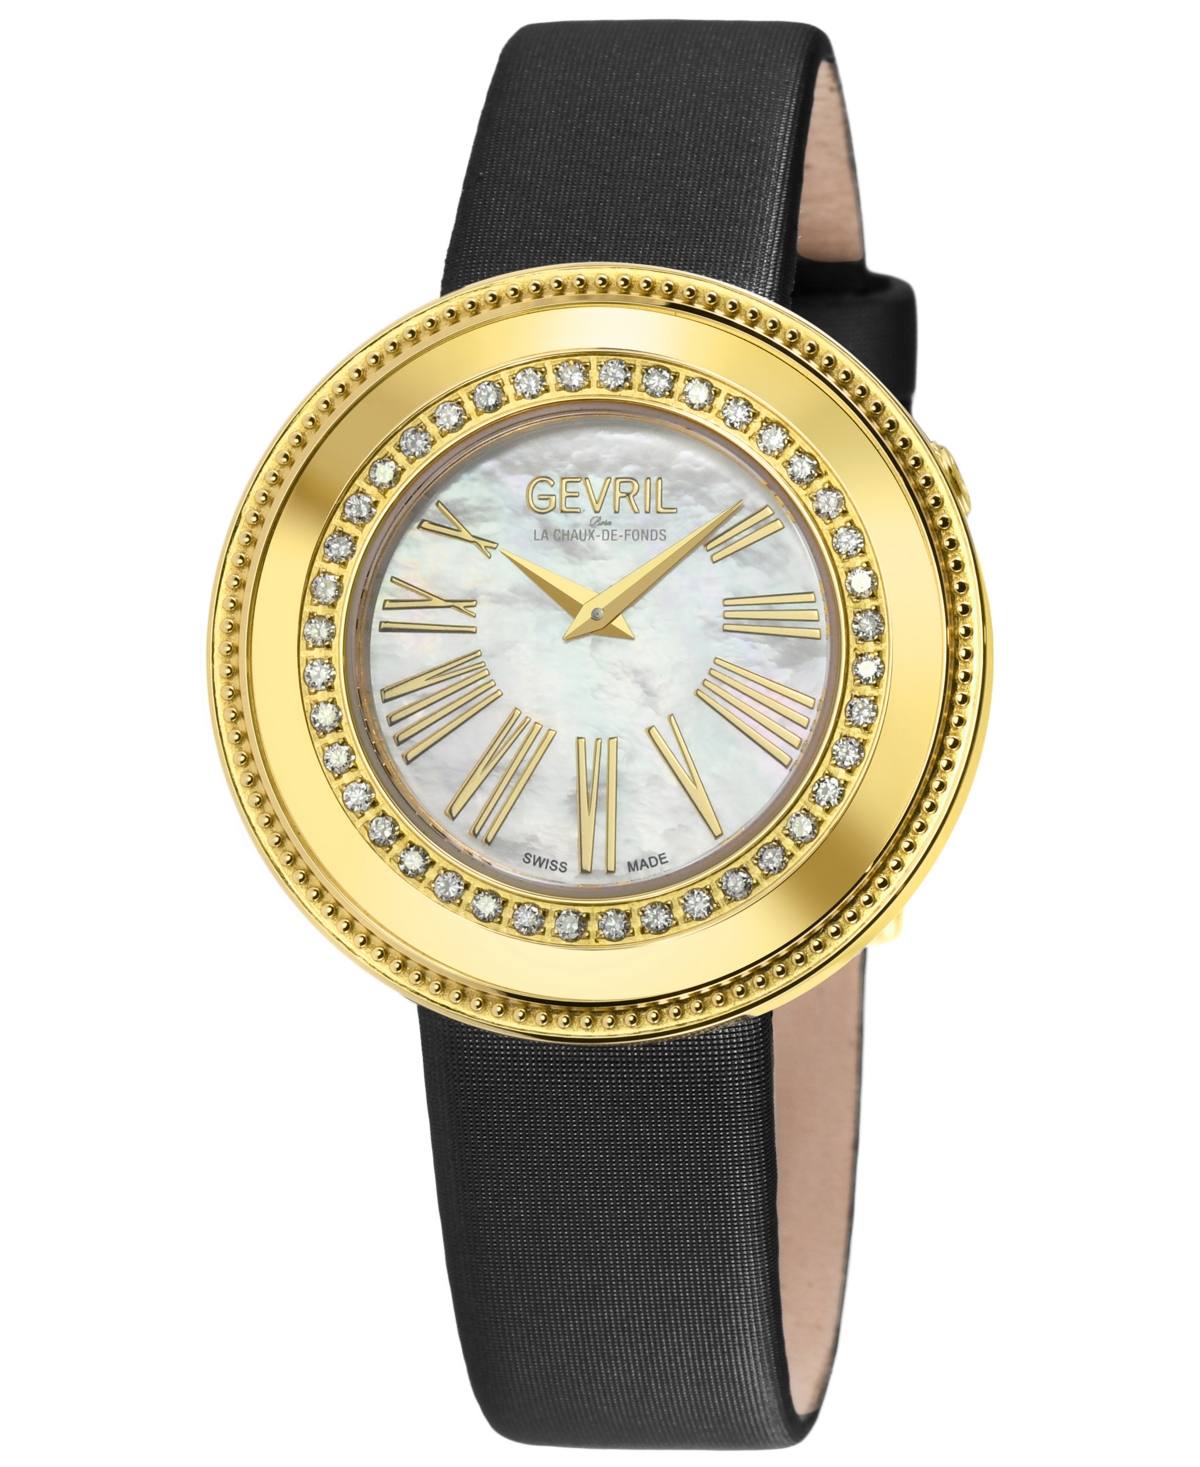 Gevril Gandria Mother Of Pearl Dial Ladies Watch 12121 In Black / Gold Tone / Mop / Mother Of Pearl / Yellow